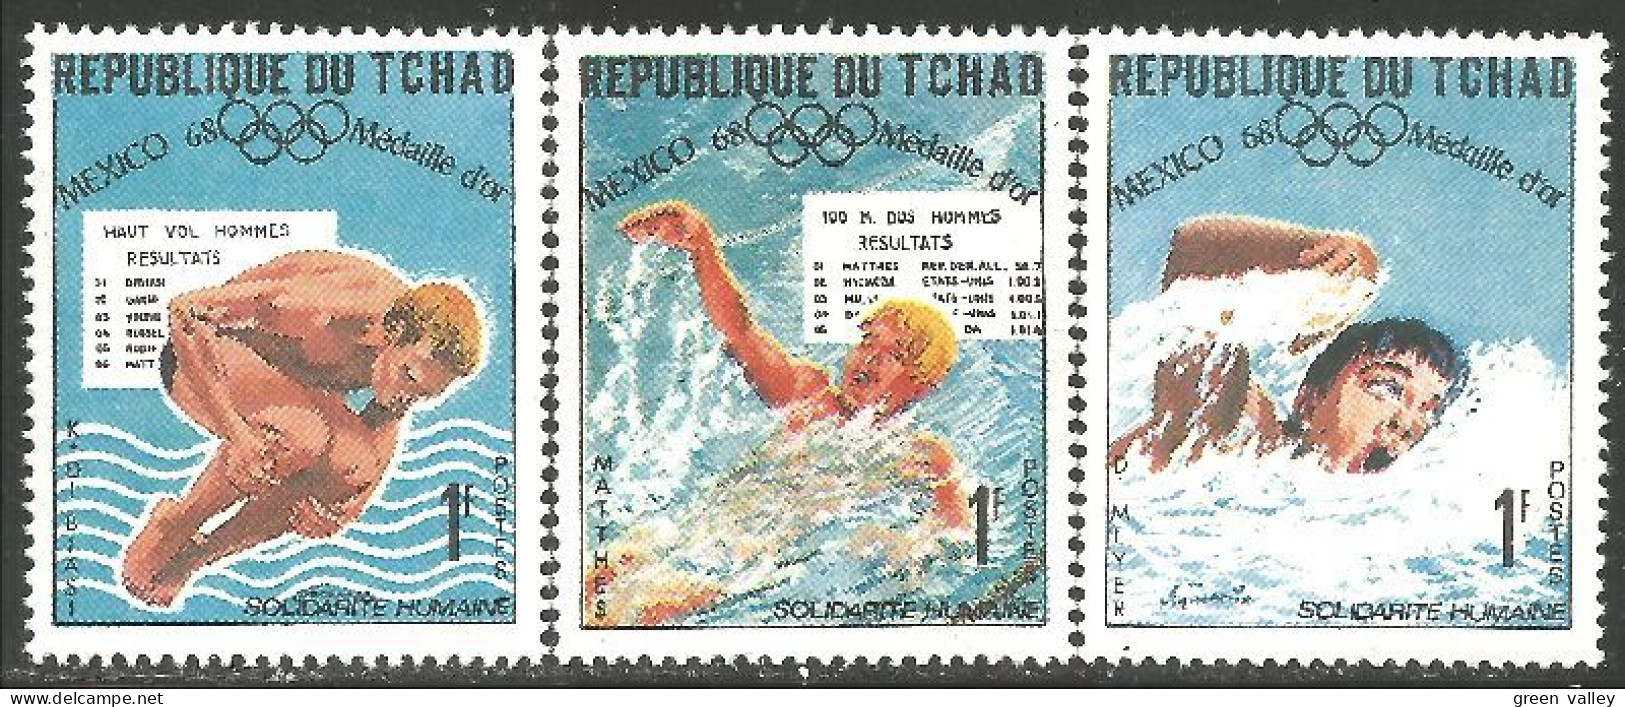 855 Tchad Natation Swimming Mexico Olympiques 1968 MNH ** Neuf SC (TCD-36b) - Sommer 1968: Mexico